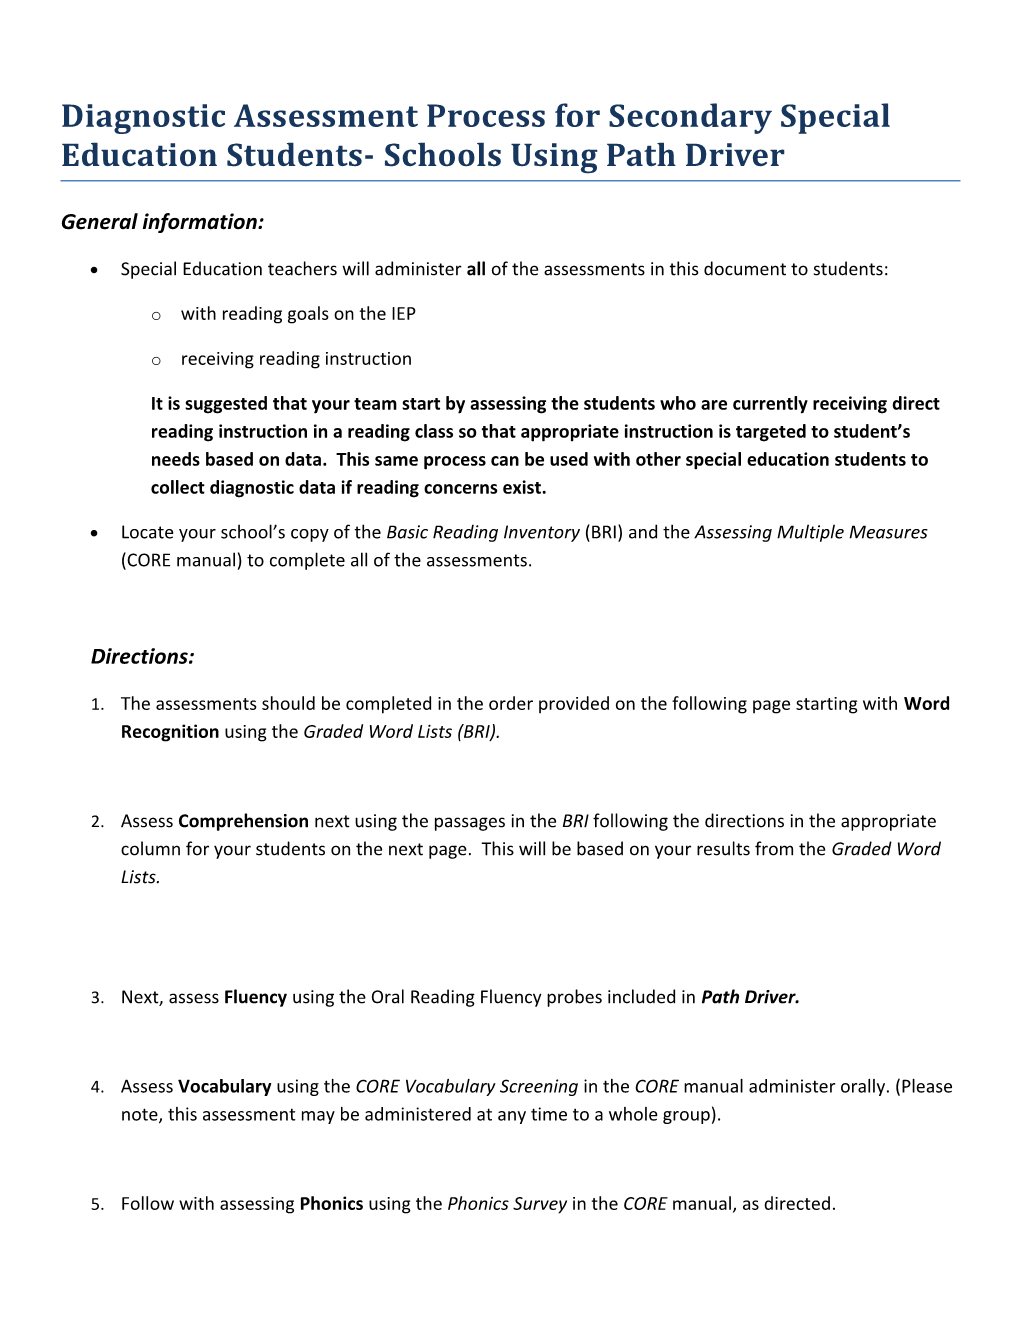 Diagnostic Assessment Process for Secondary Special Education Students- Schools Using Path